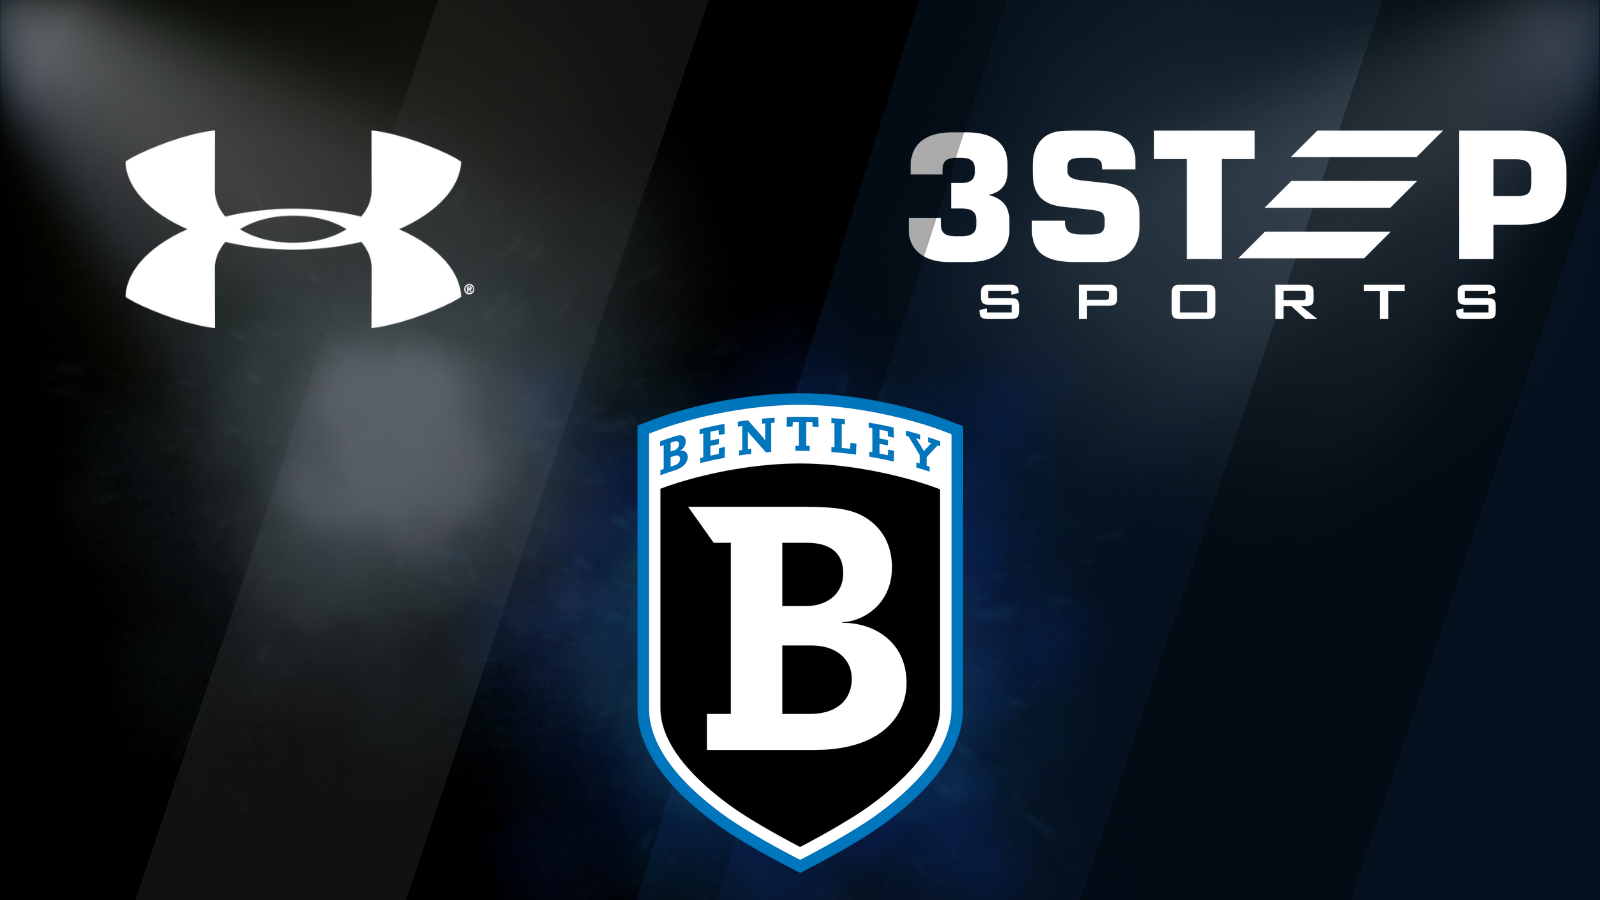 Under Armour, 3STEP and Bentley logos